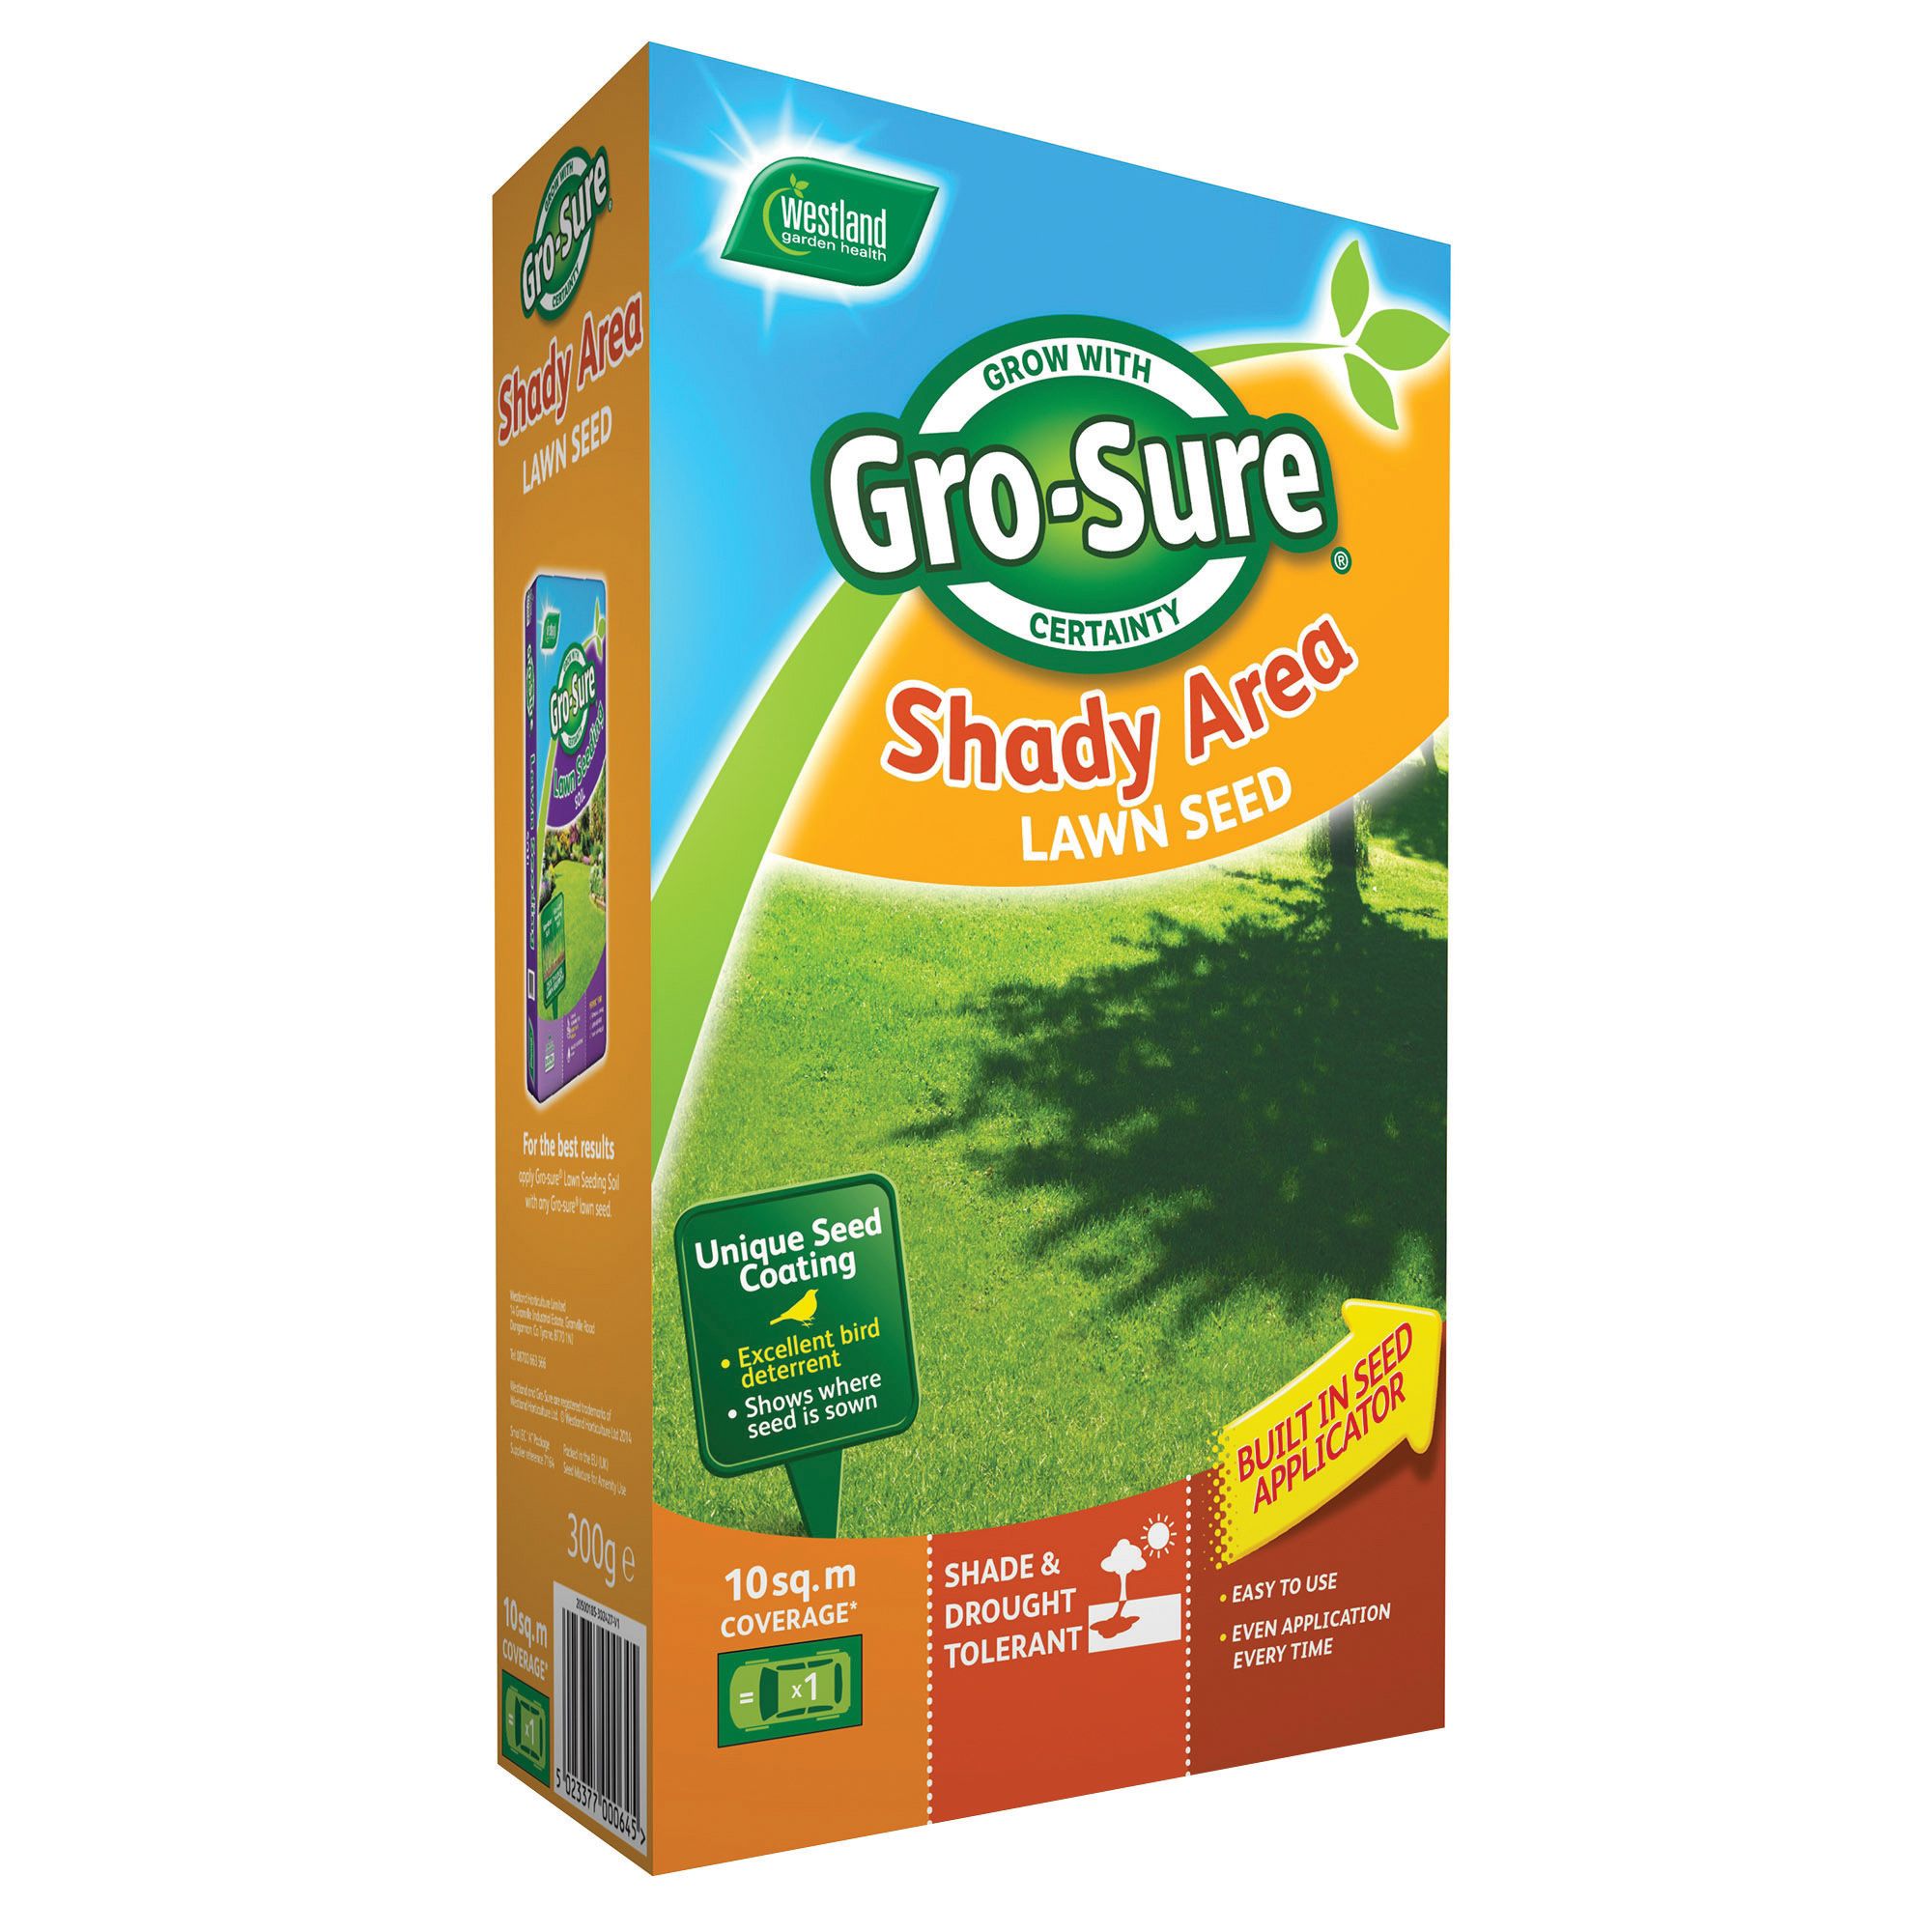 Image of Gro-Sure Shady Lawn Seed - 10m² - 300g